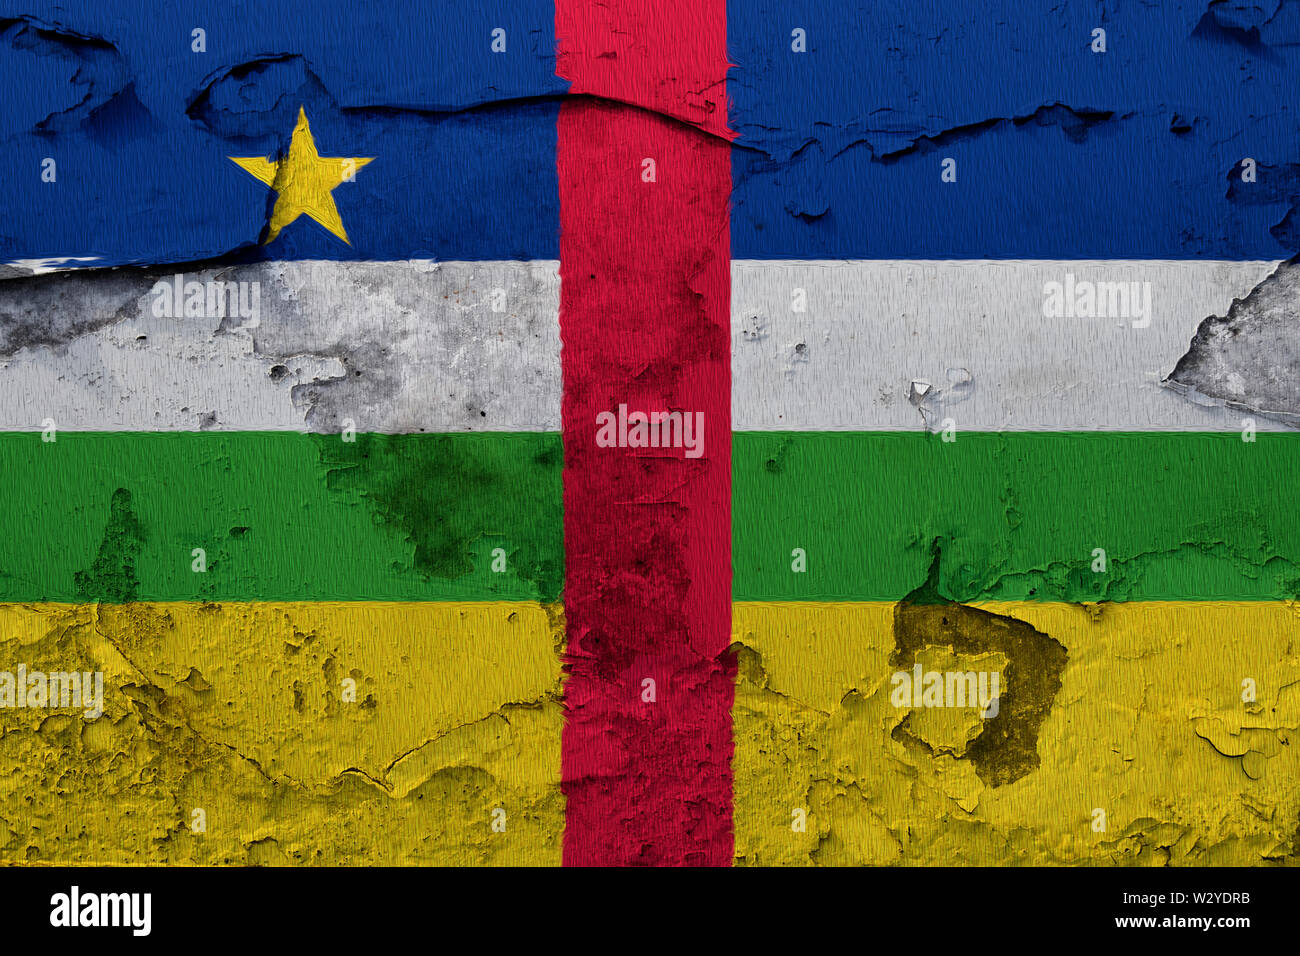 Central African Republic flag painted on the cracked grunge concrete wall Stock Photo